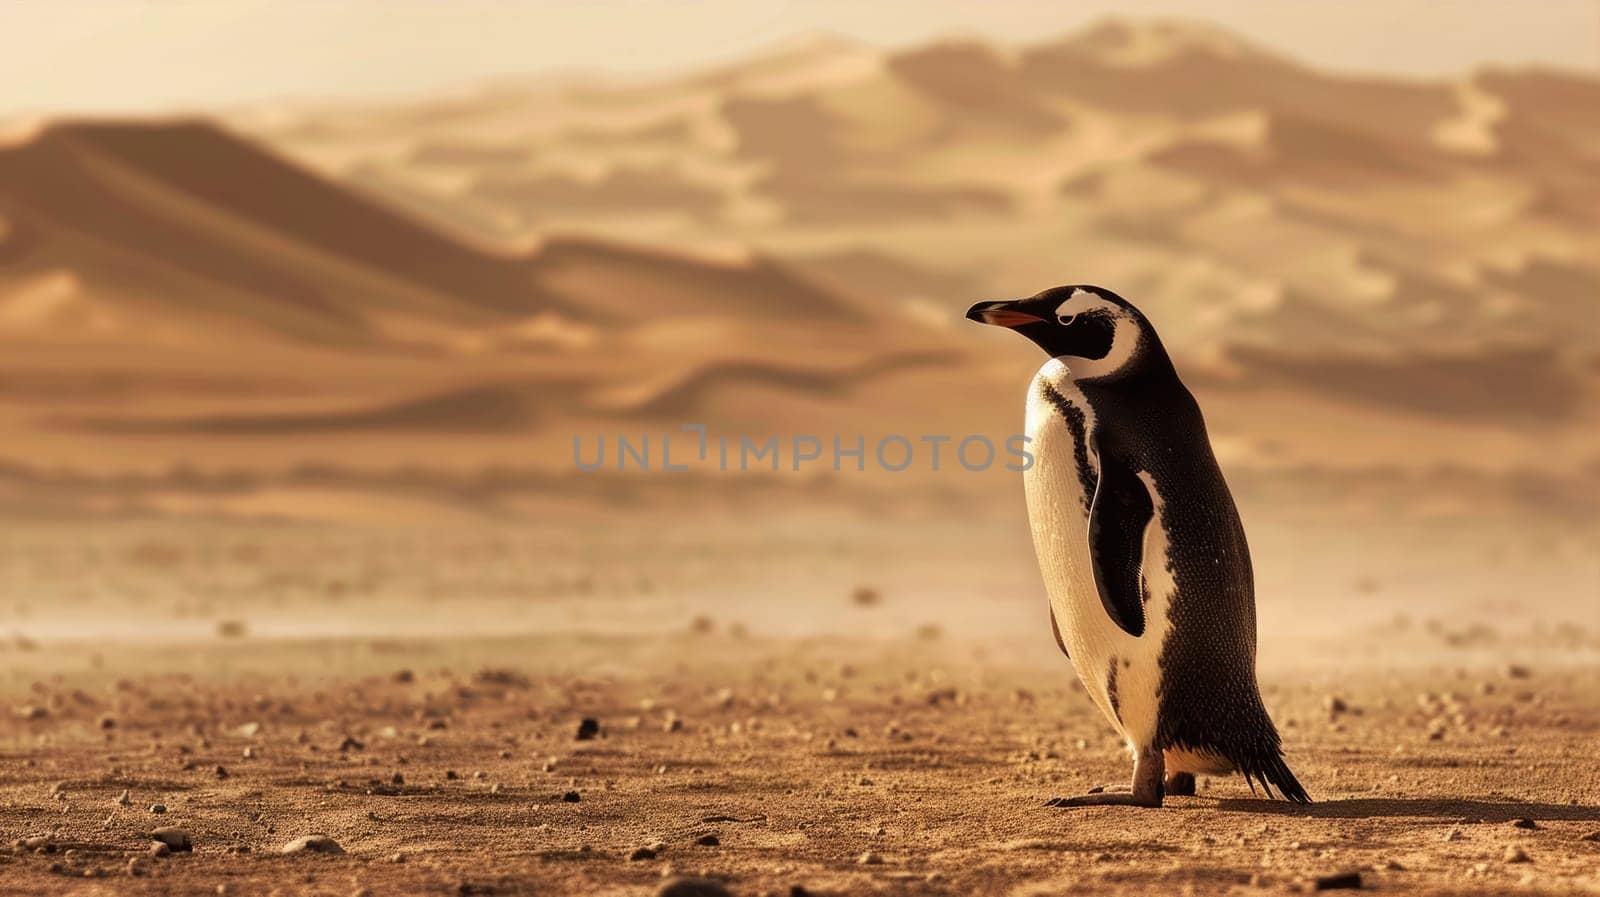 Penguin lost in the desert by natali_brill